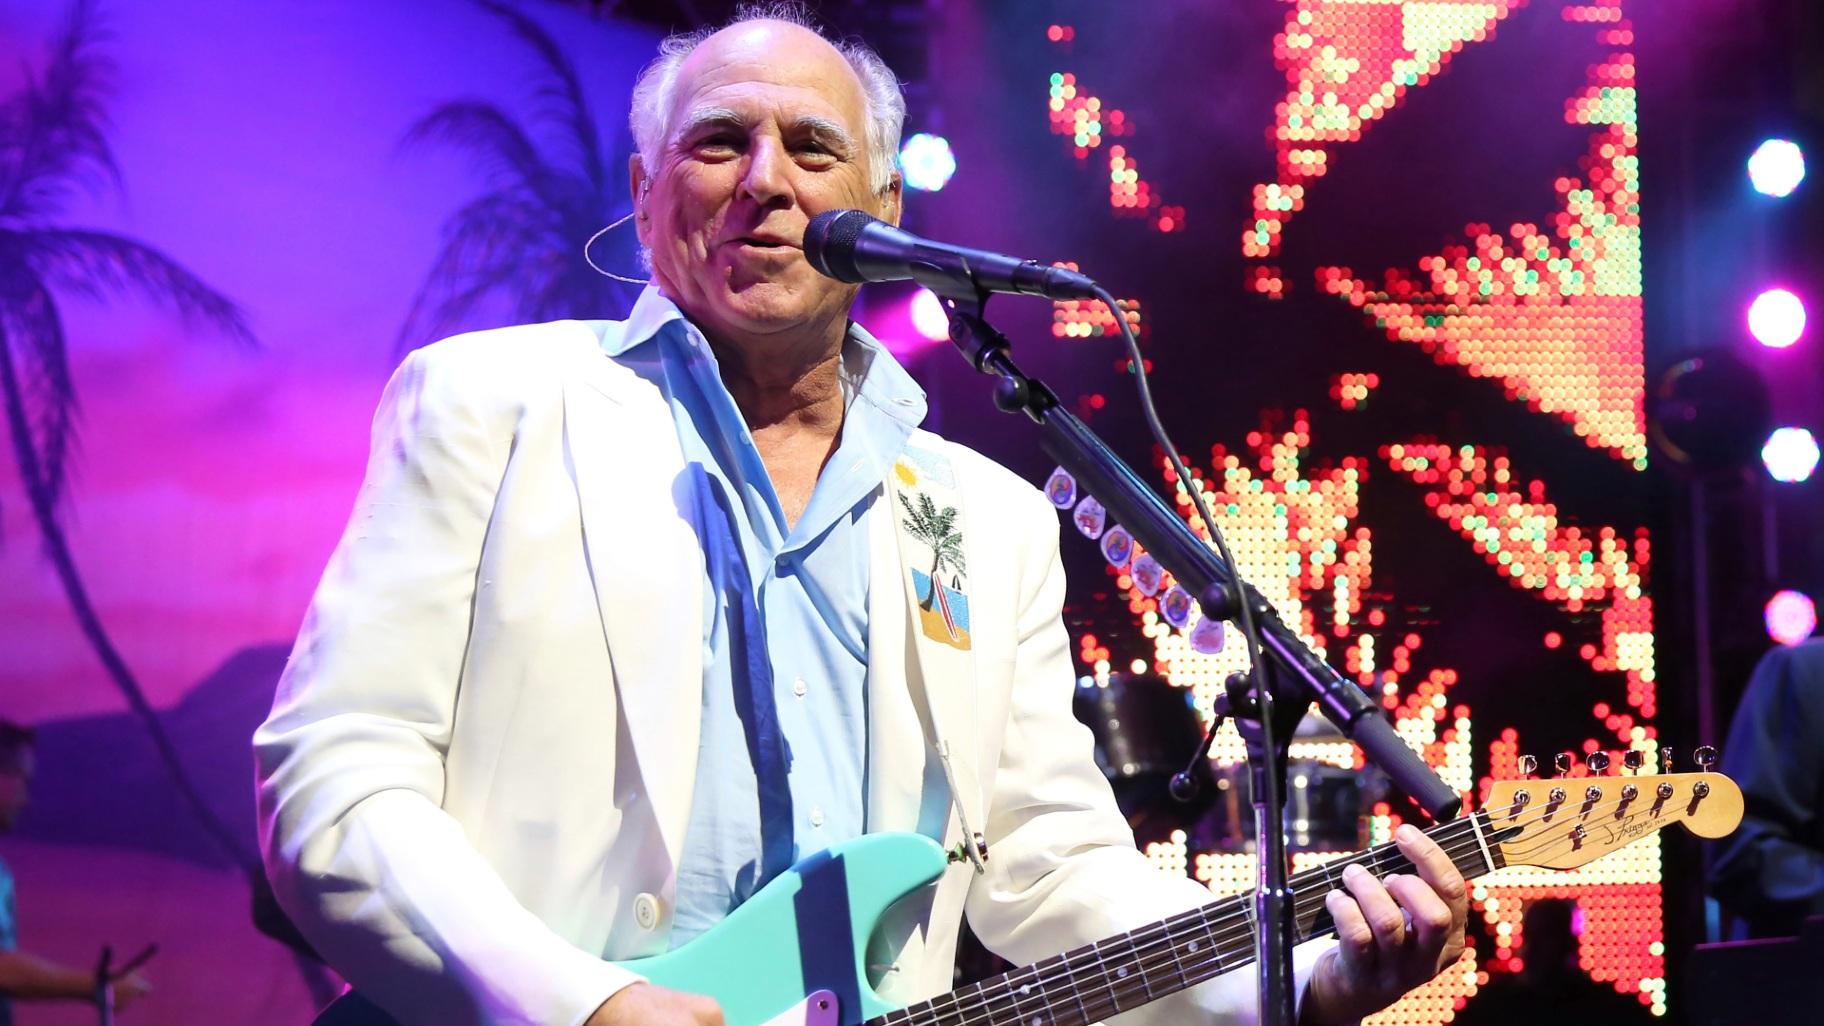 FILE - Jimmy Buffett performs at the after party for the premiere of “Jurassic World” in Los Angeles, on June 9, 2015. (Matt Sayles / Invision / AP, File)